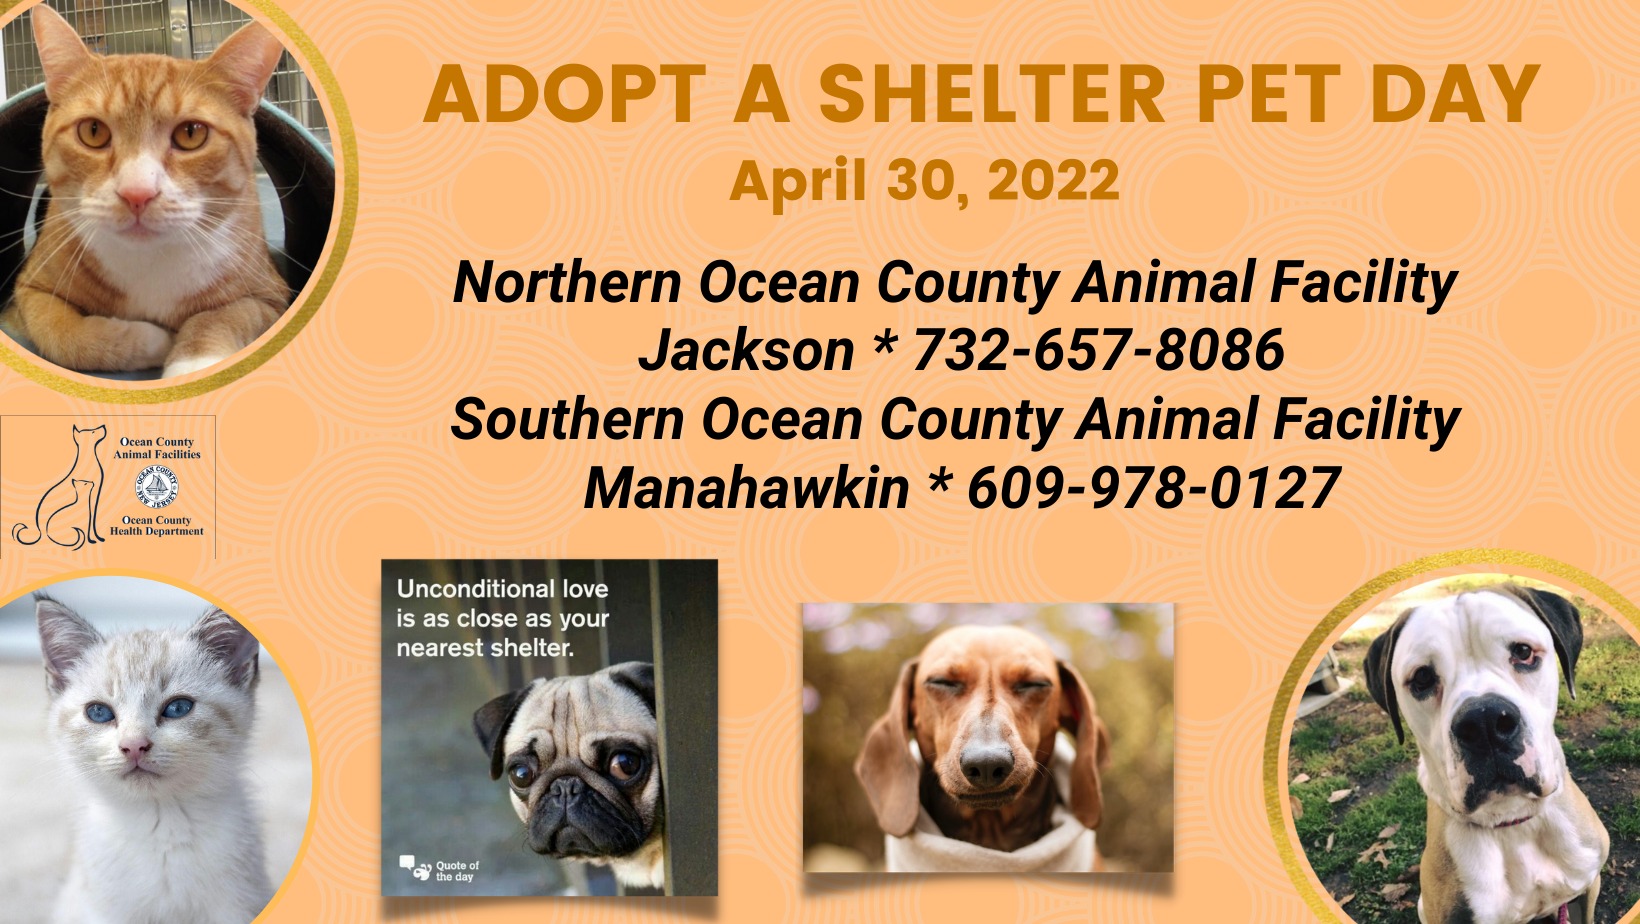 NATIONAL ADOPT A SHELTER PET DAY